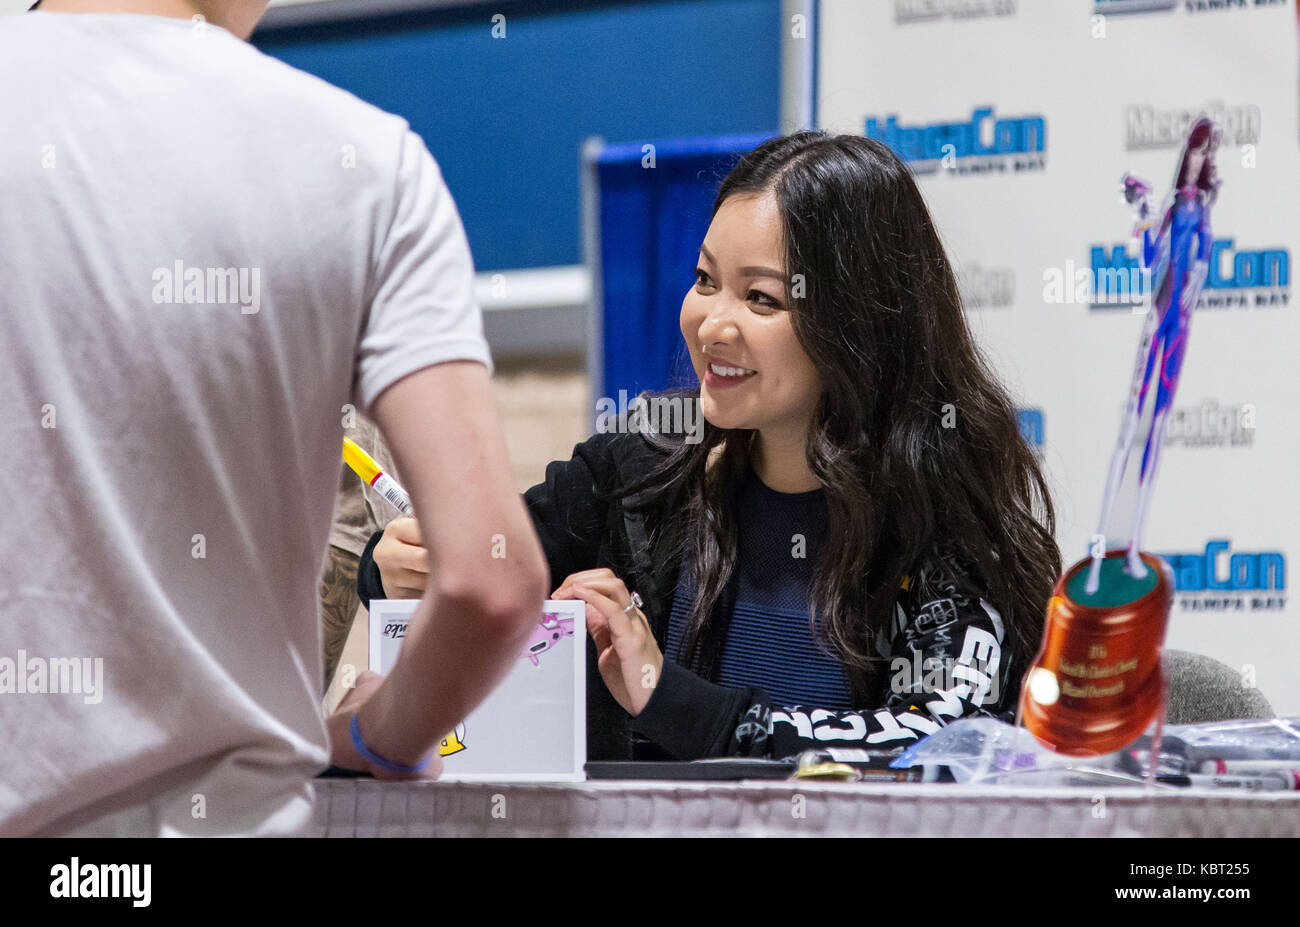 Page 3 - Fan Expo High Resolution Stock Photography and Images - Alamy